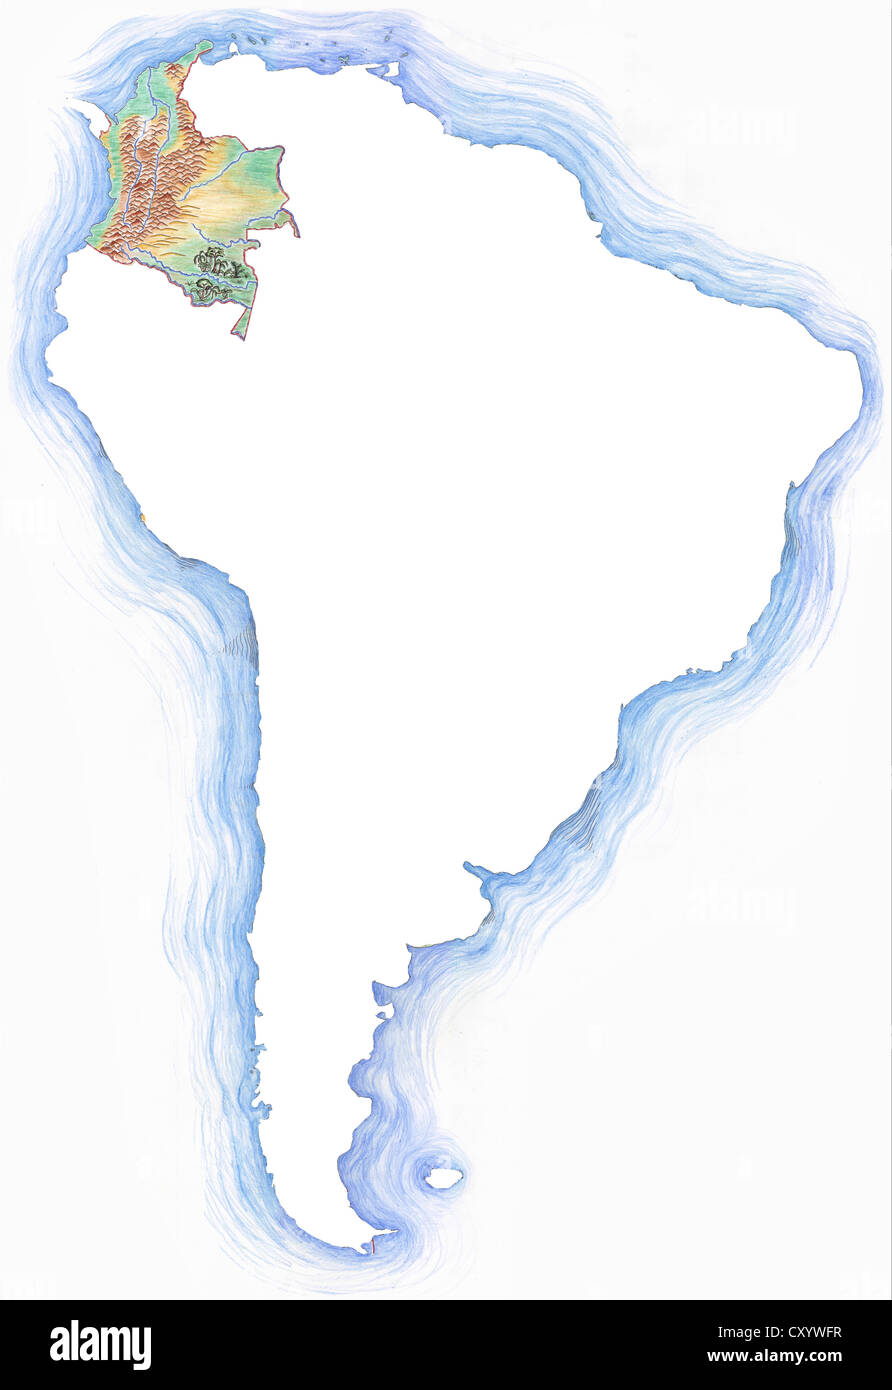 Highly detailed hand-drawn map of Colombia within the outline of South America Stock Photo